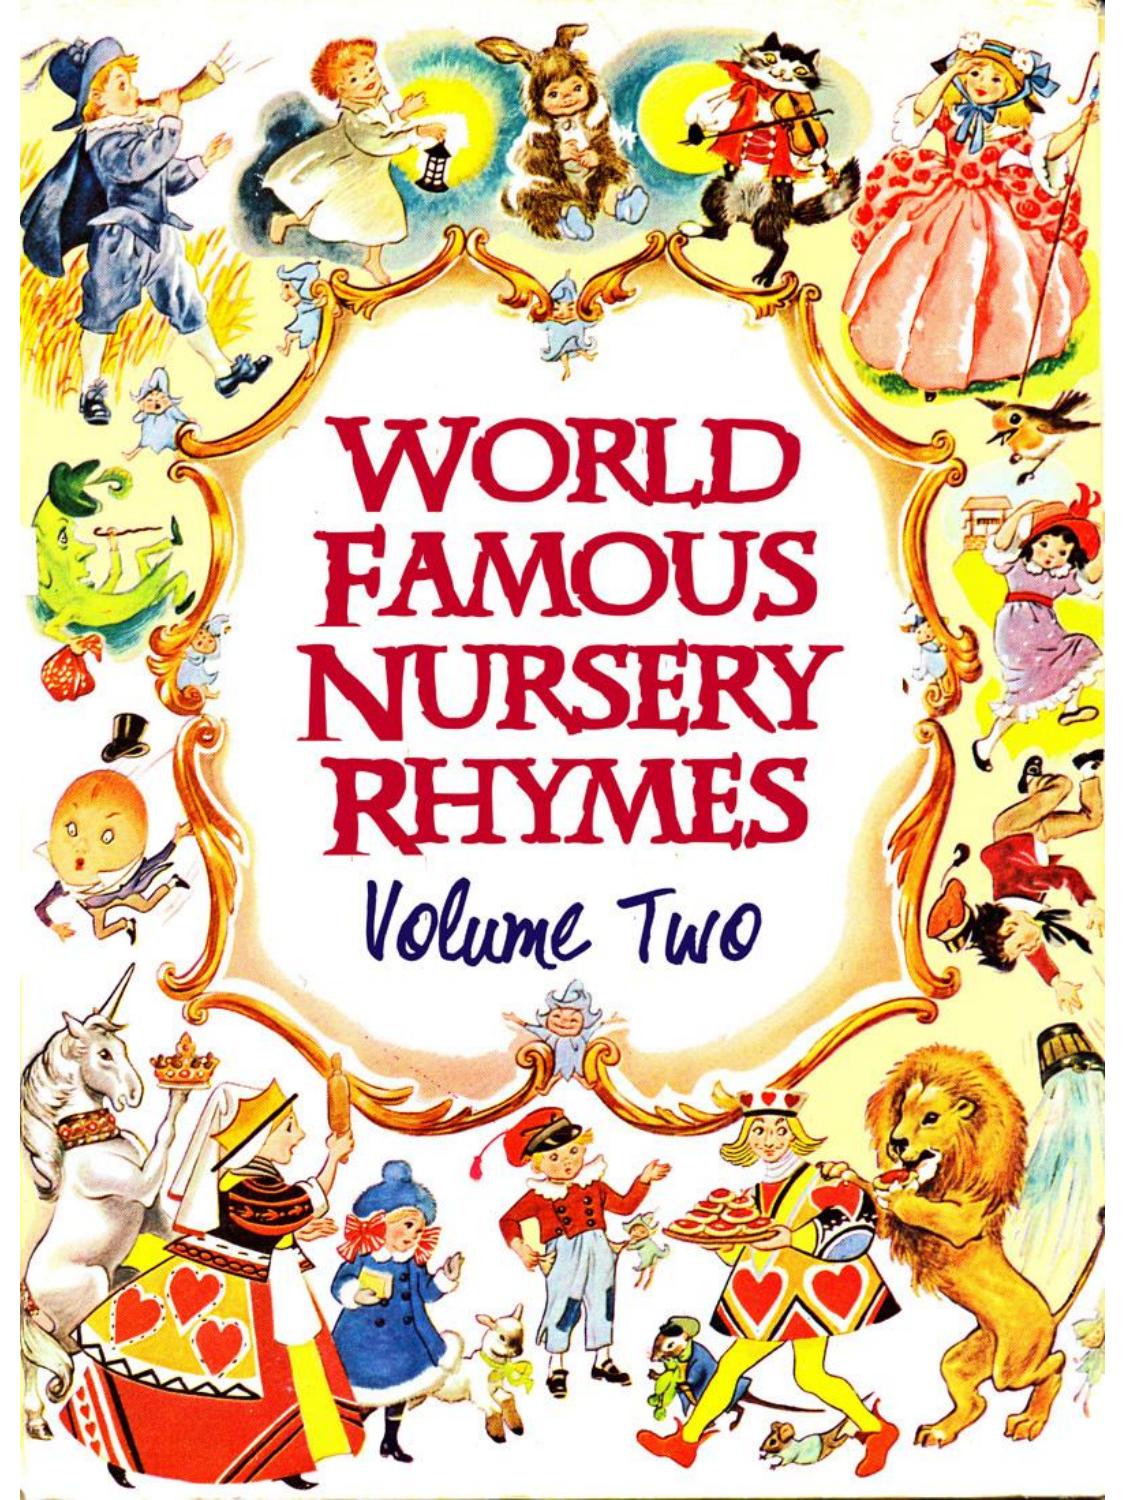 World Famous Nursery Rhymes Volume Two